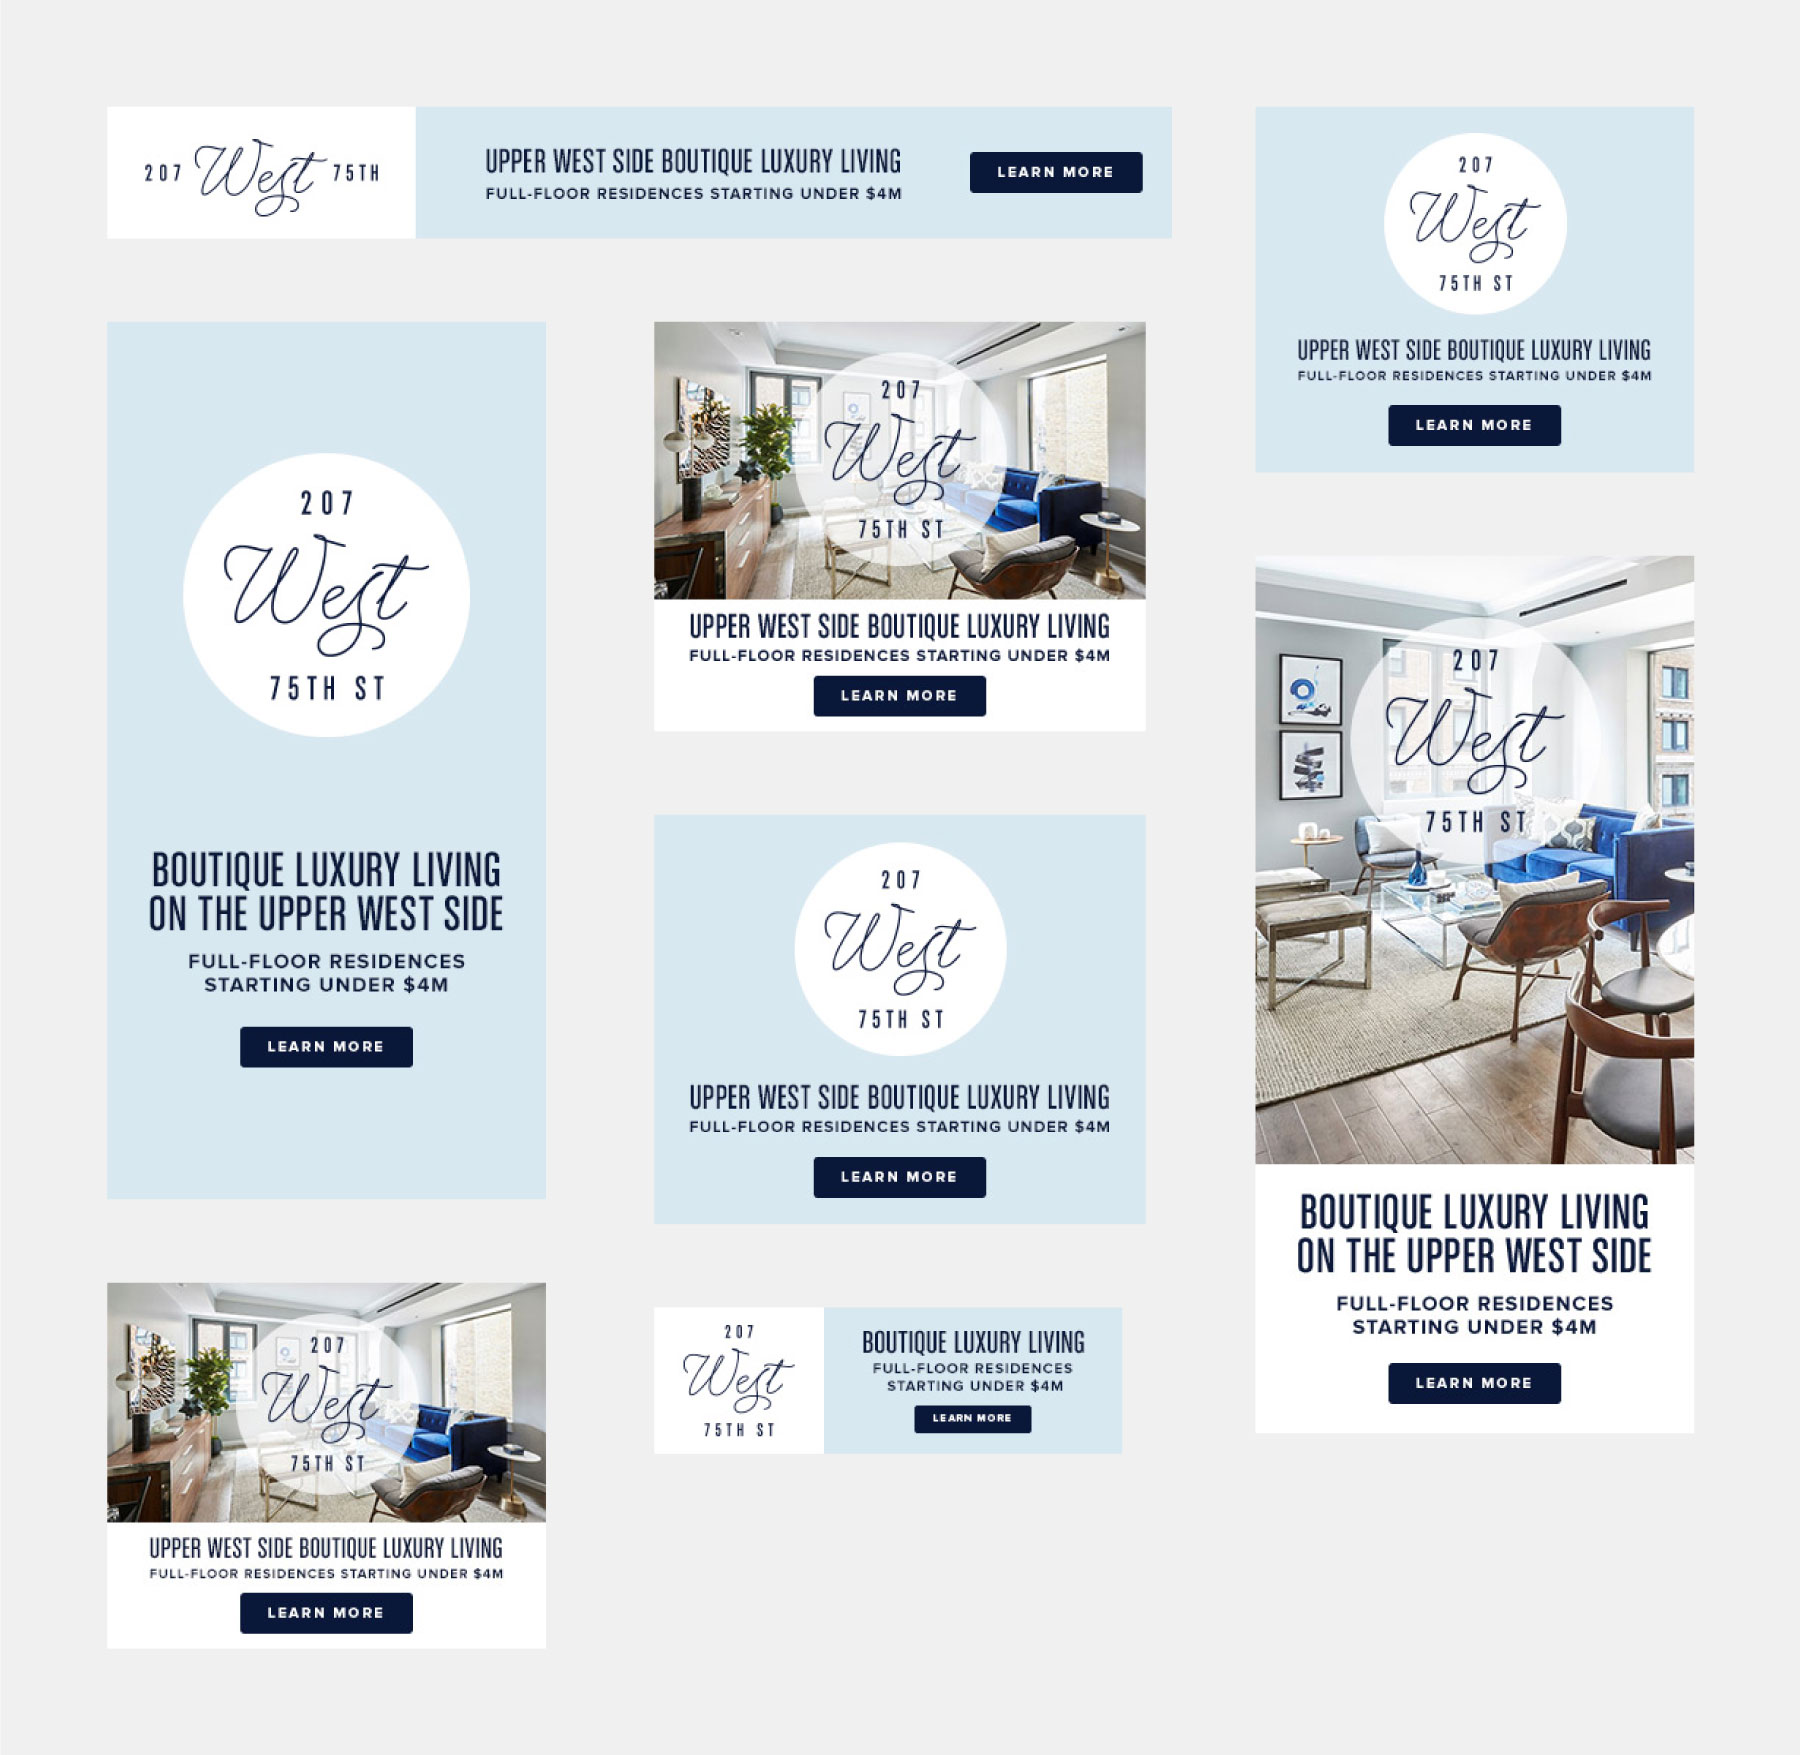 Various digital ad layouts for 207 West 75th Street